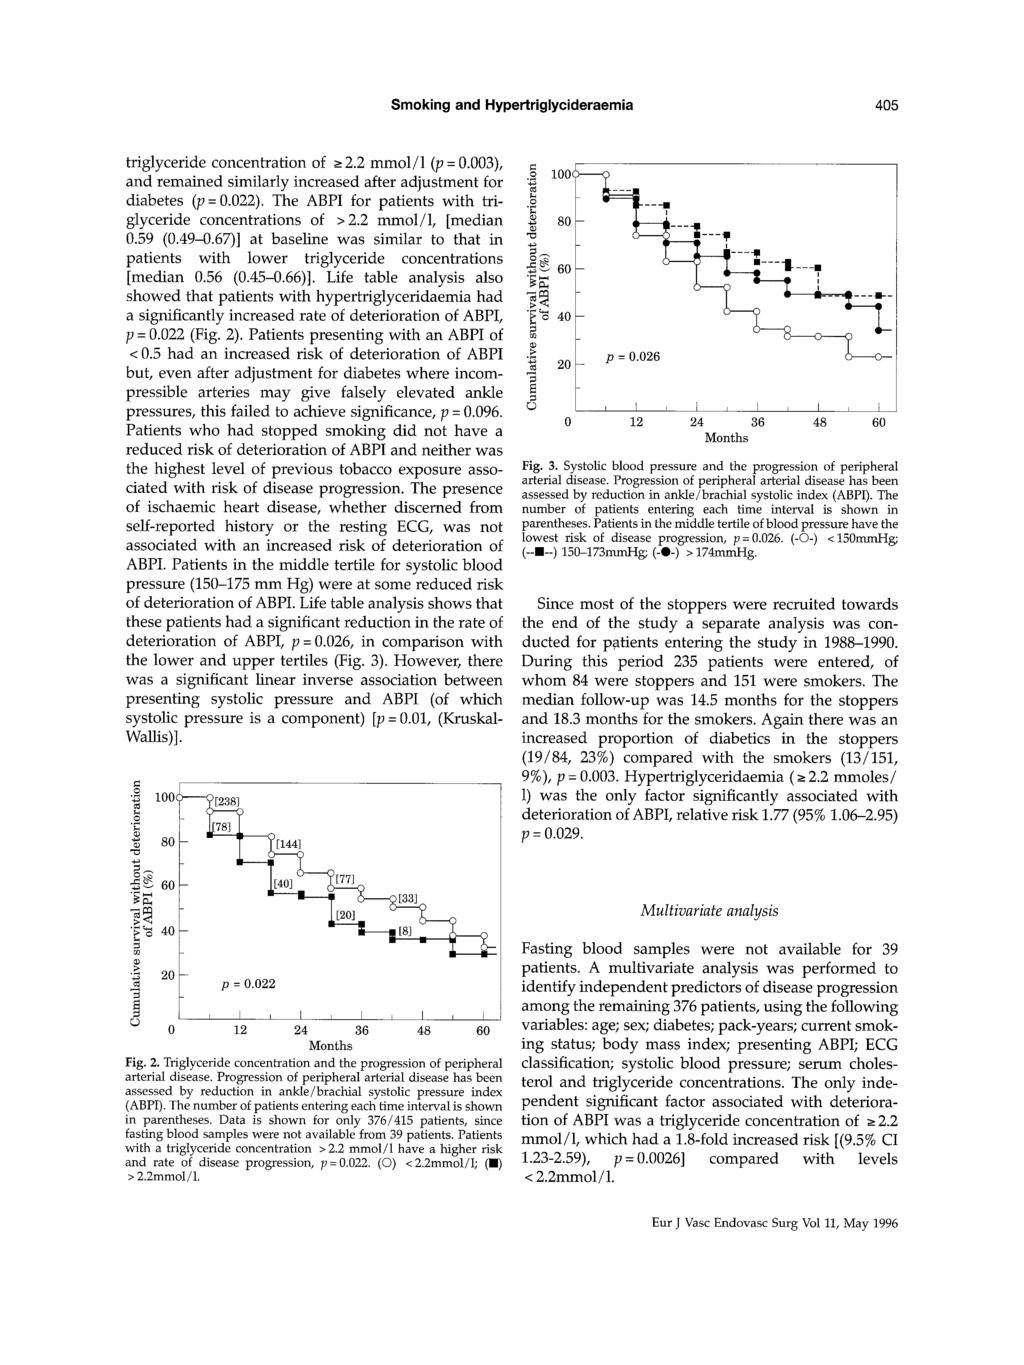 Smoking and Hypertriglycideraemia 405 triglyceride concentration of > 2.2 mmol/1 (p = 0.003), and remained similarly increased after adjustment for diabetes (p = 0.022).